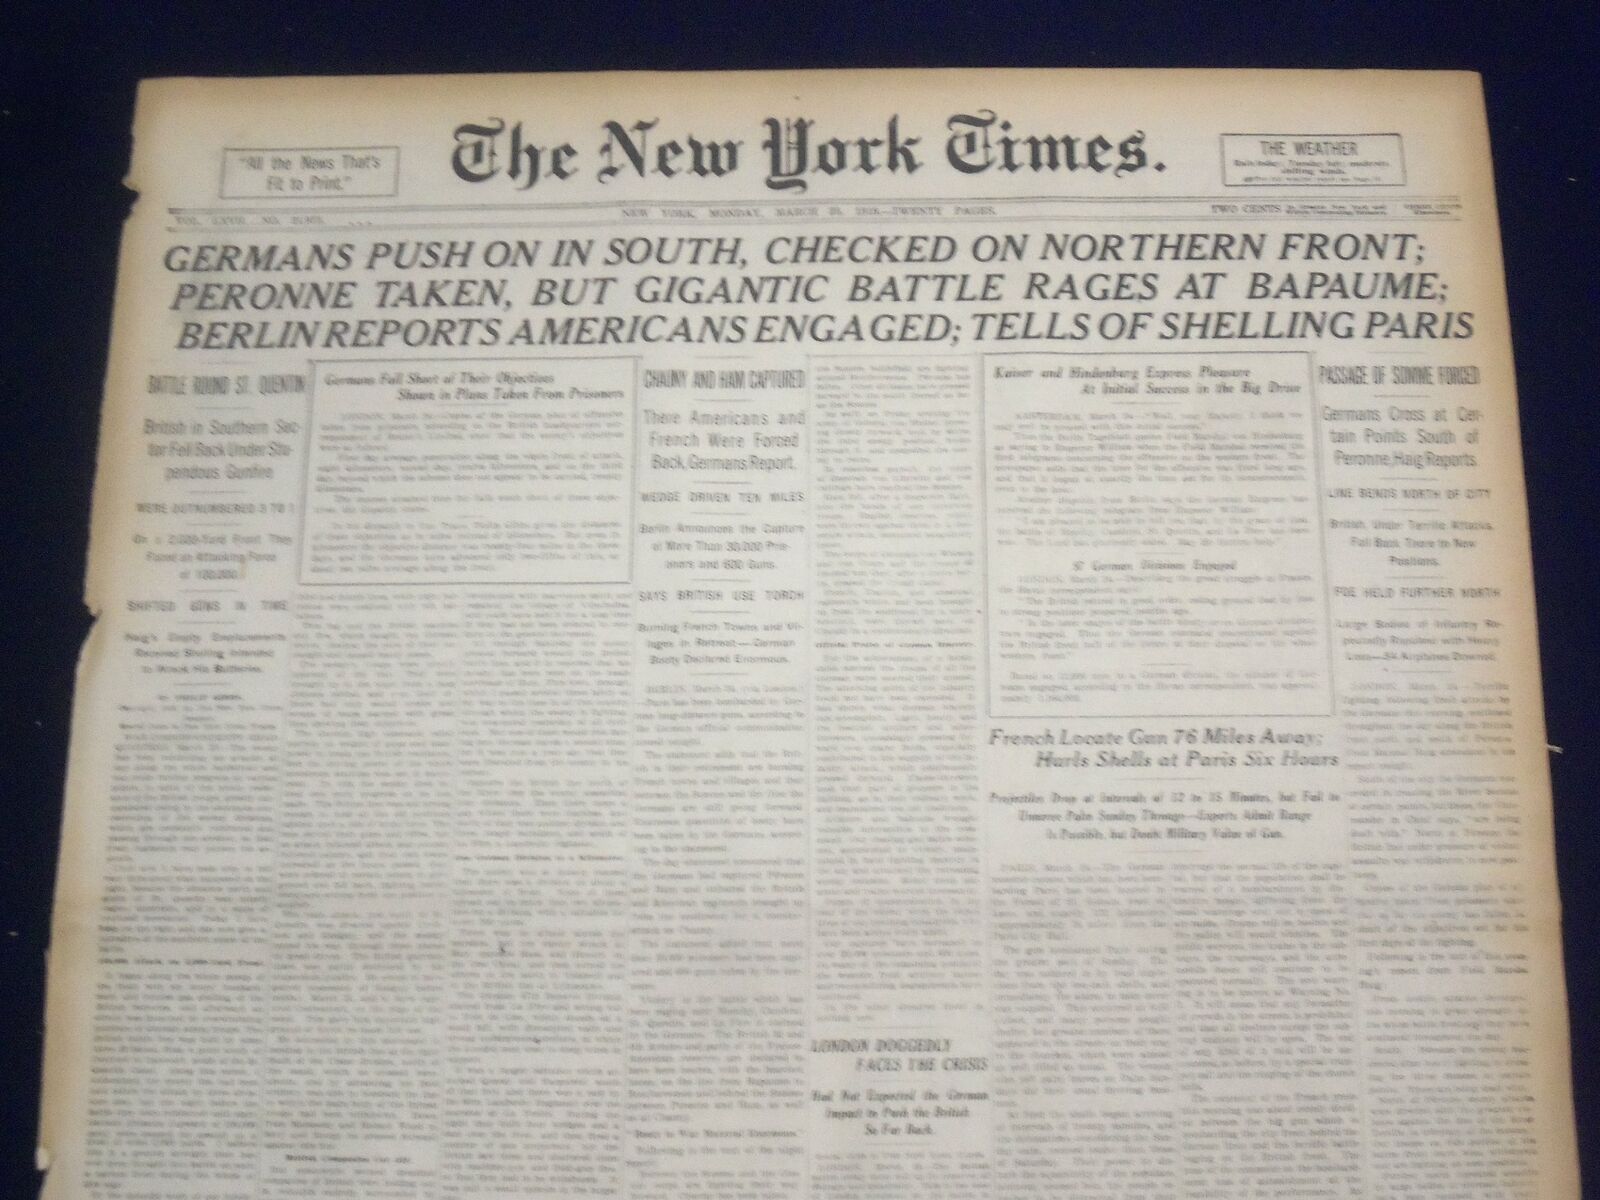 1918 MARCH 25 NEW YORK TIMES - GERMANS PUSH ON IN SOUTH - NT 8160